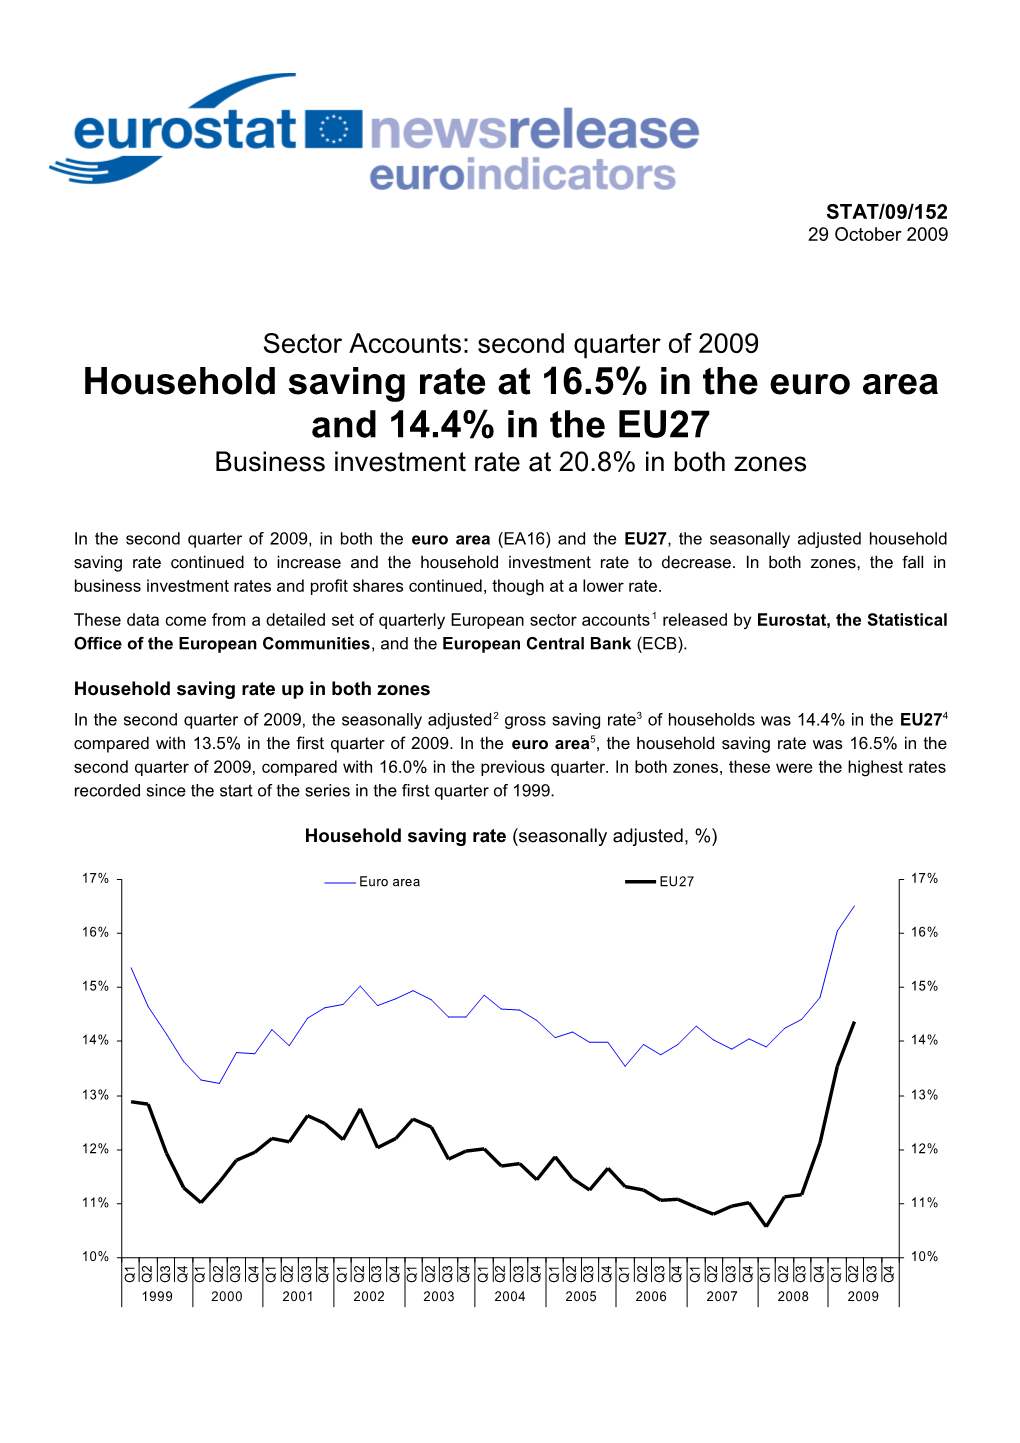 Household Saving Rate up in Both Zones